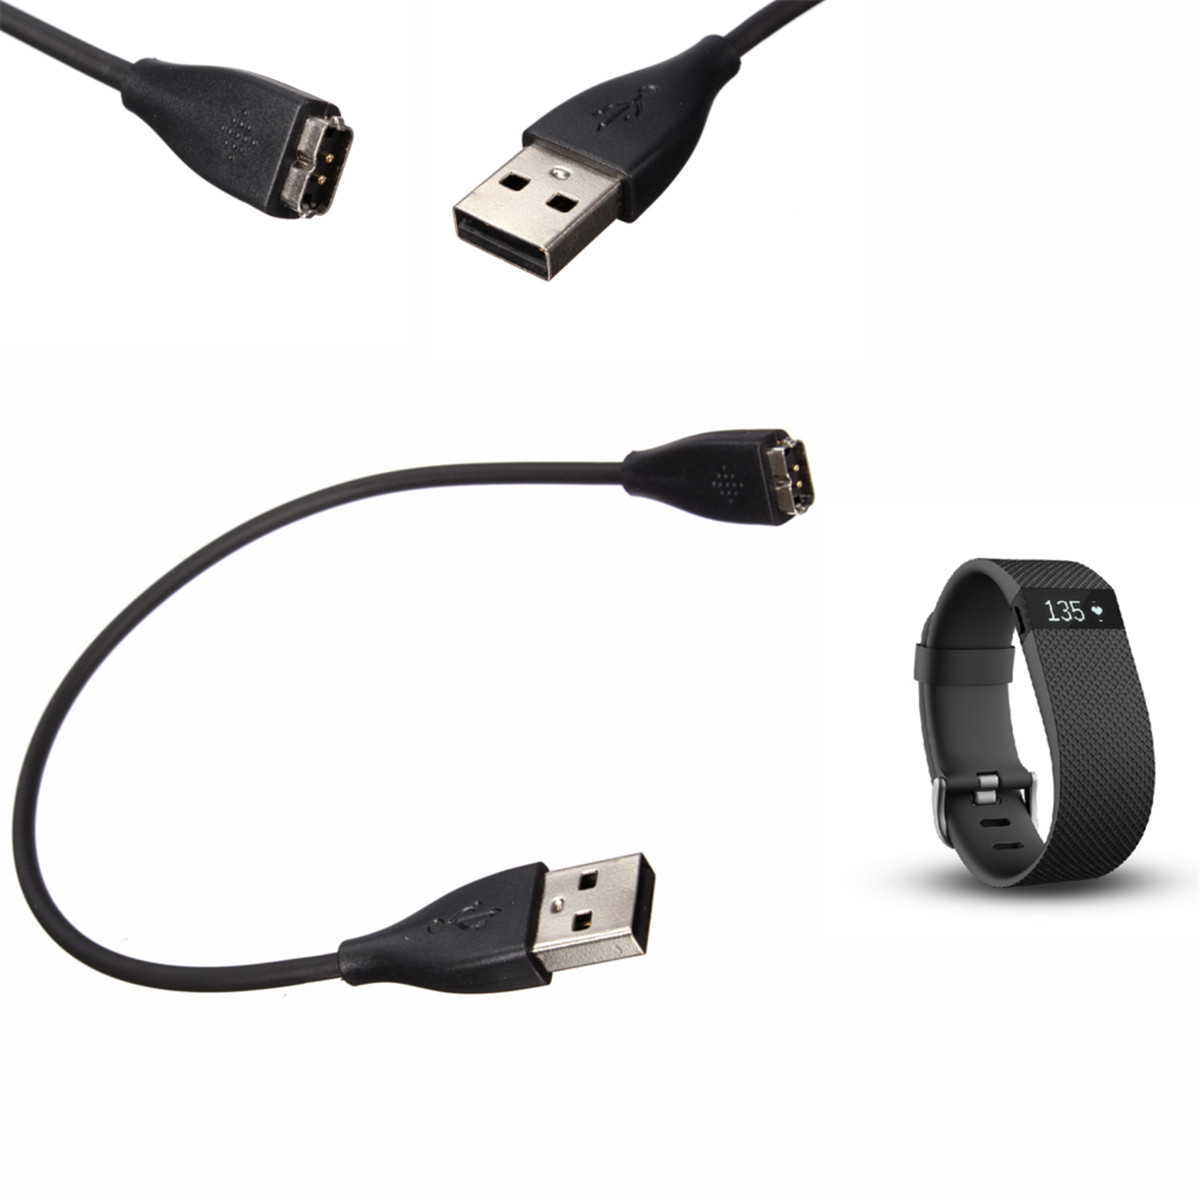 Original Micro USB Input Charging Cable For Fitbit Charge HR Black ...